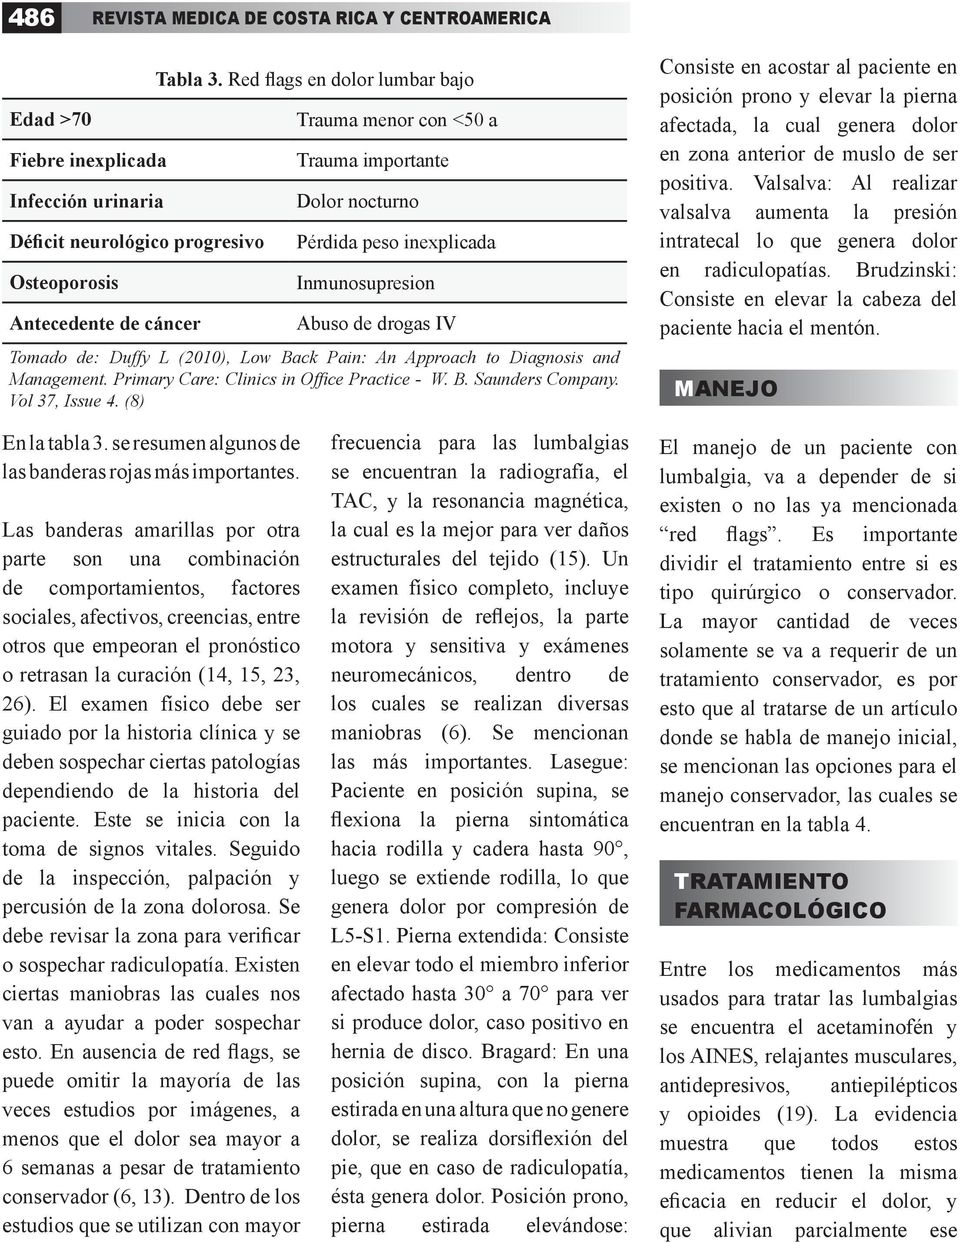 Approach to Diagnosis and Management. Primary Care: Clinics in Office Practice - W. B. Saunders Company. Vol 37, Issue 4.